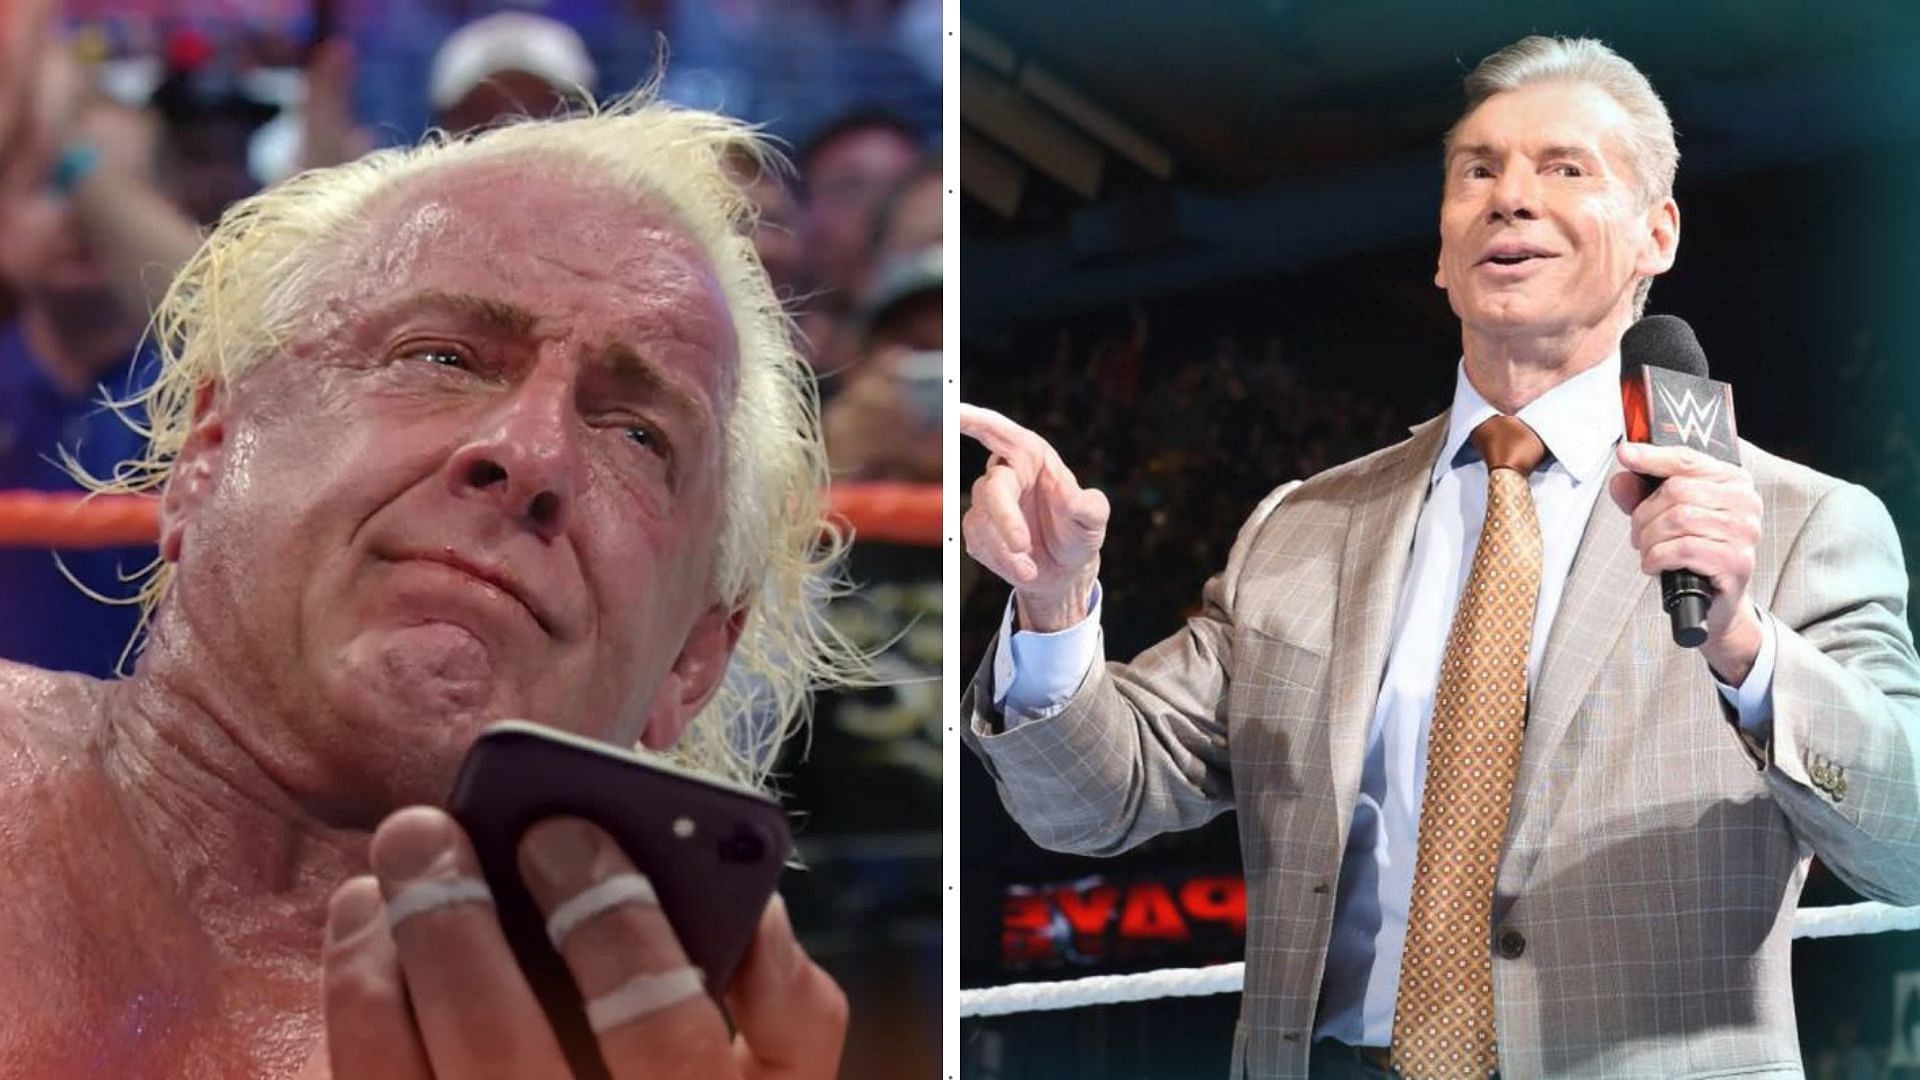 Ric Flair re-joined WWE in 2001